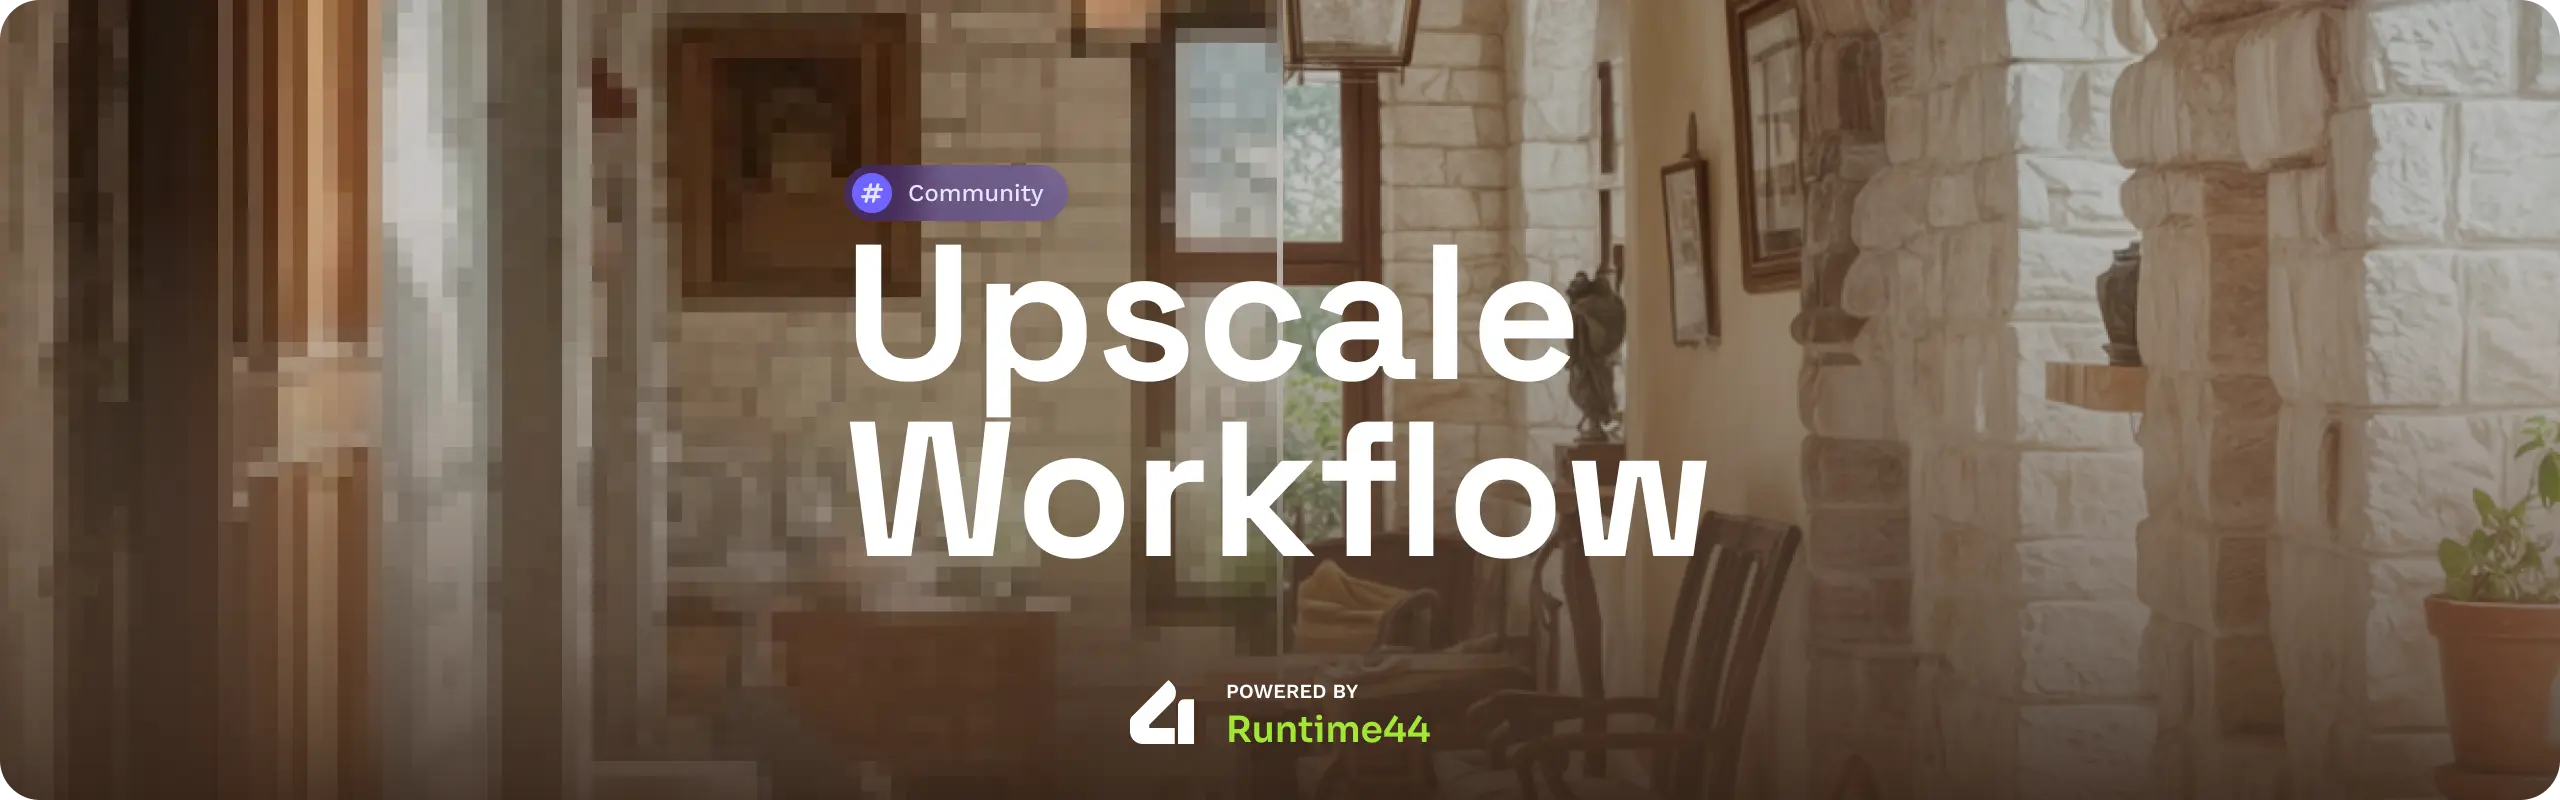 Upscale Workflow